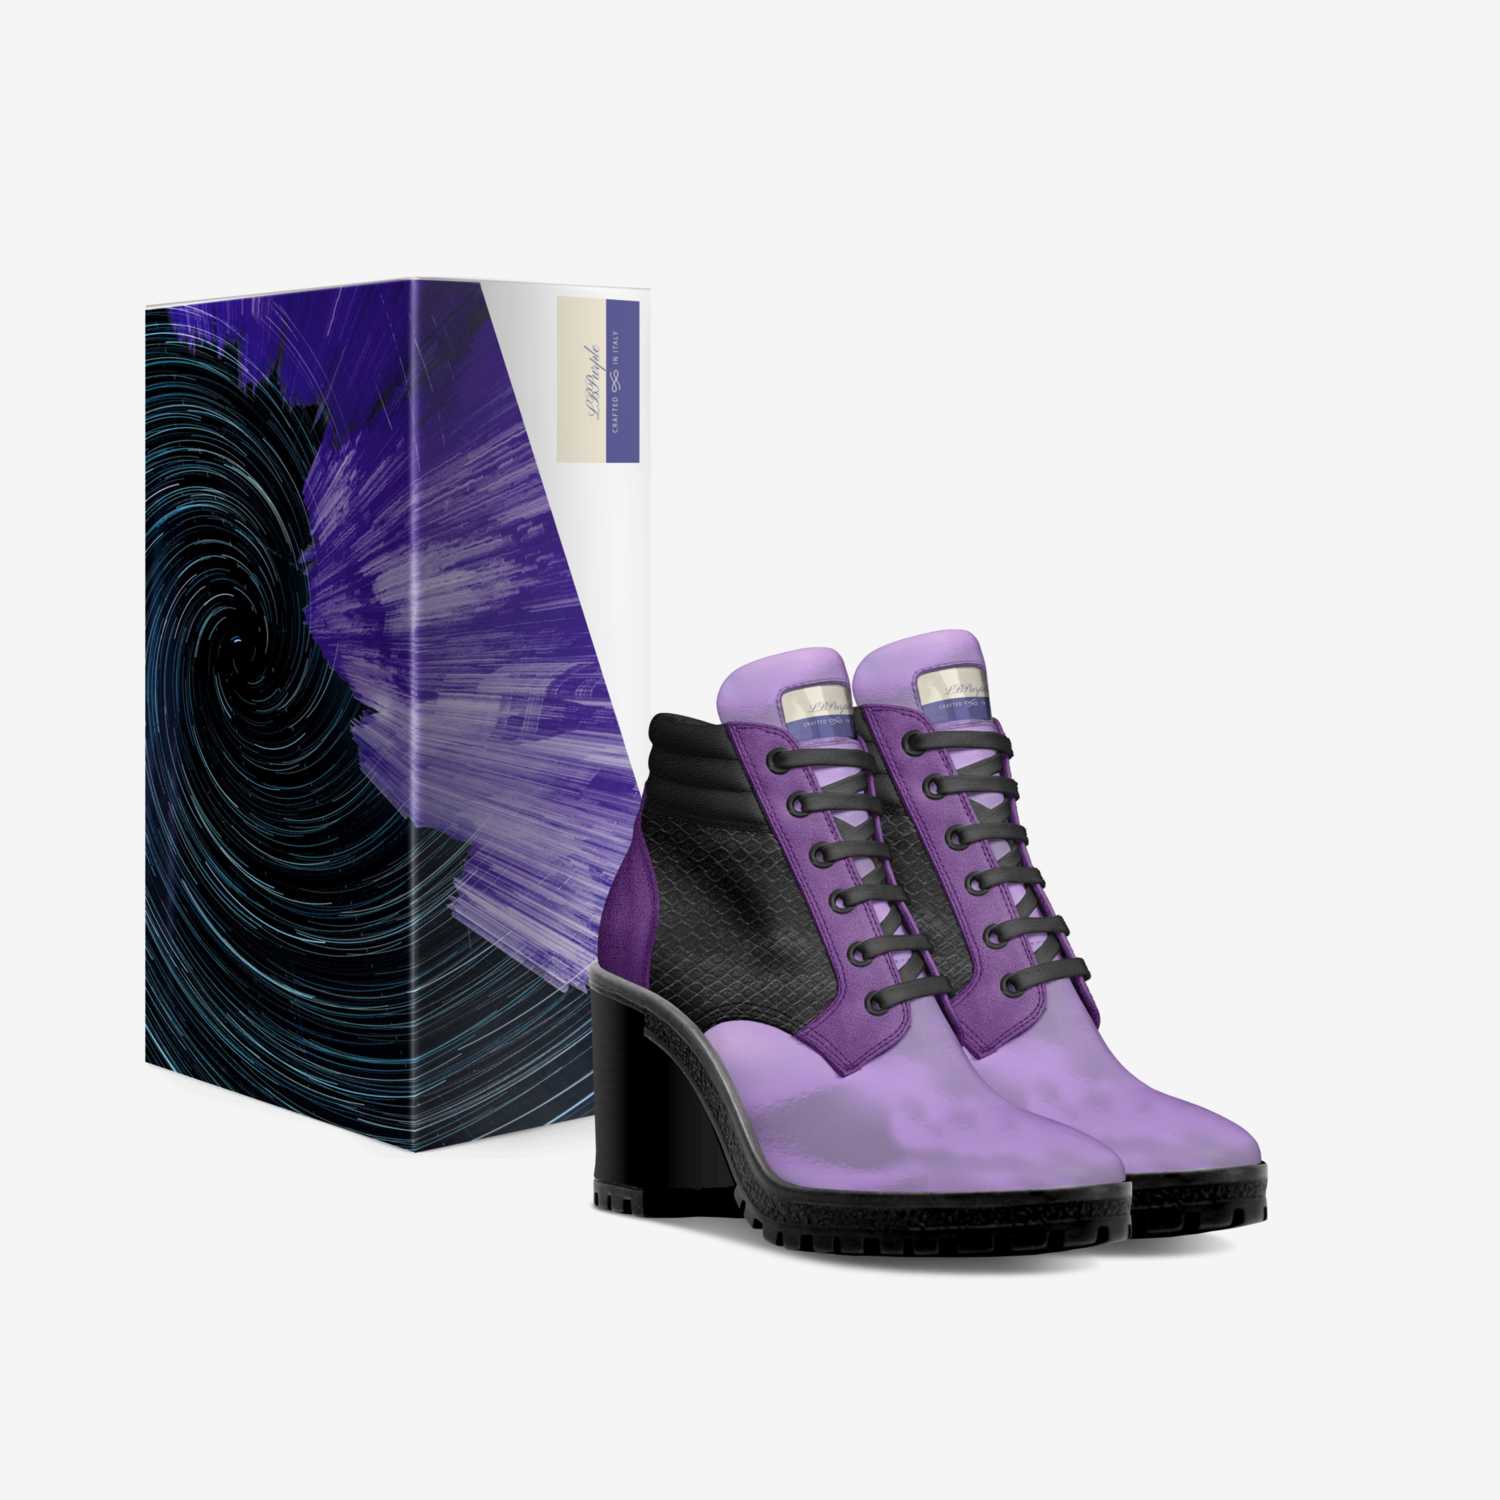 LBPurple custom made in Italy shoes by Barbara Hale | Box view